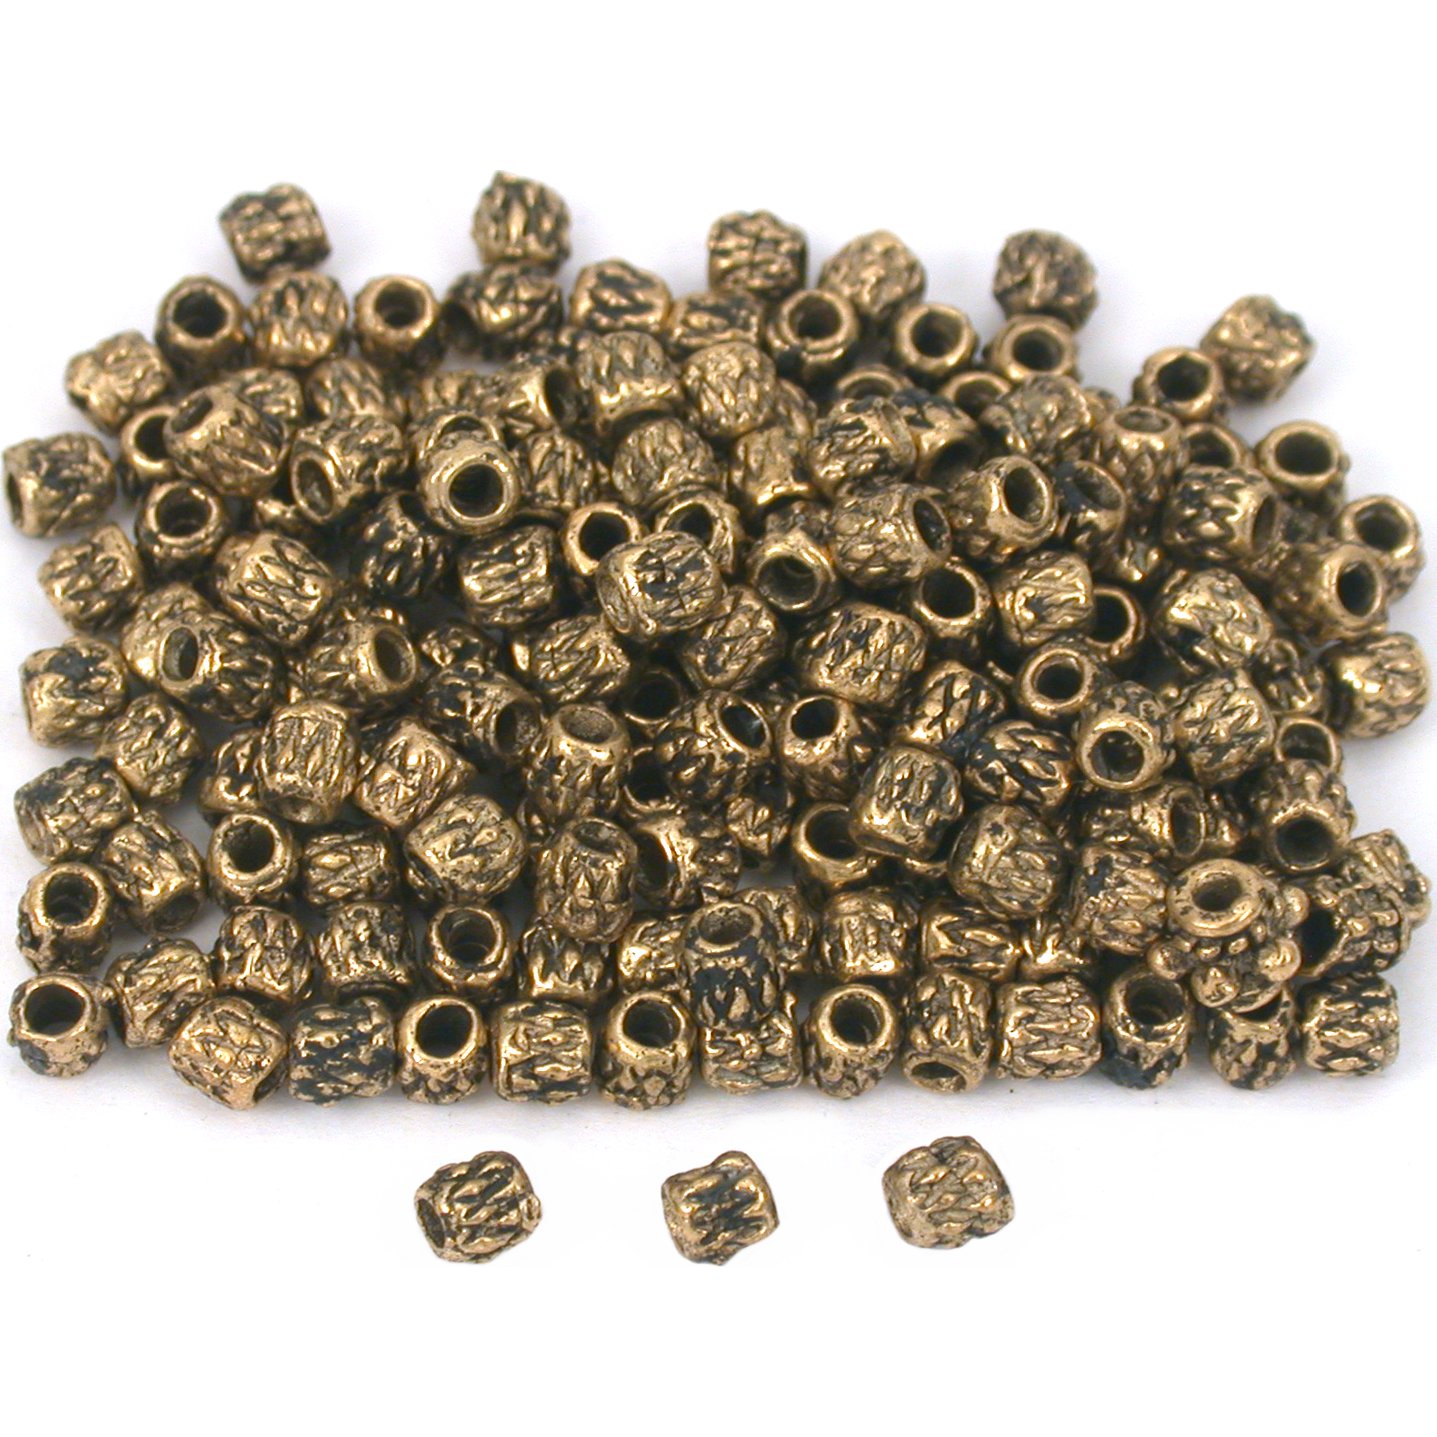 Bali Tube Beads Antique Gold Plated 3x3mm Approx 175